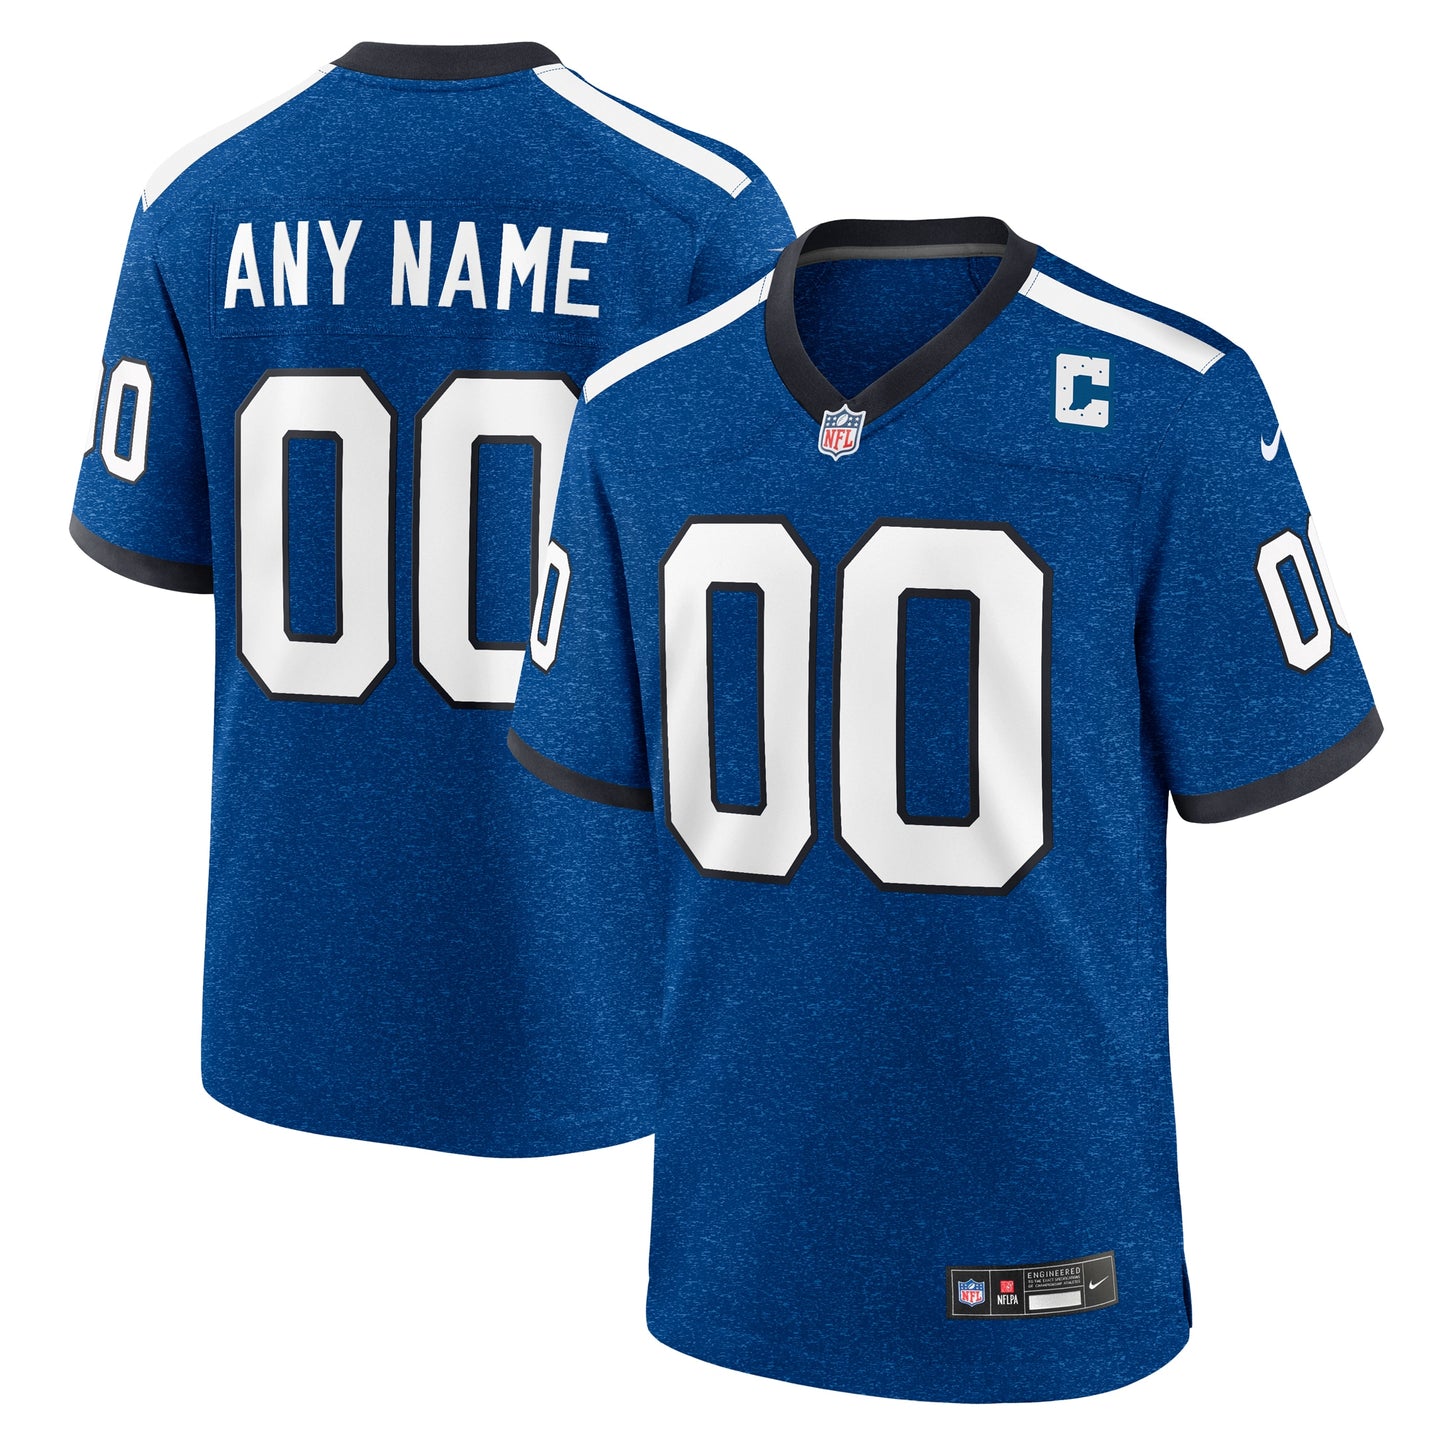 Indiana Nights Indianapolis Colts Nike Alternate Custom Game Jersey - Blue